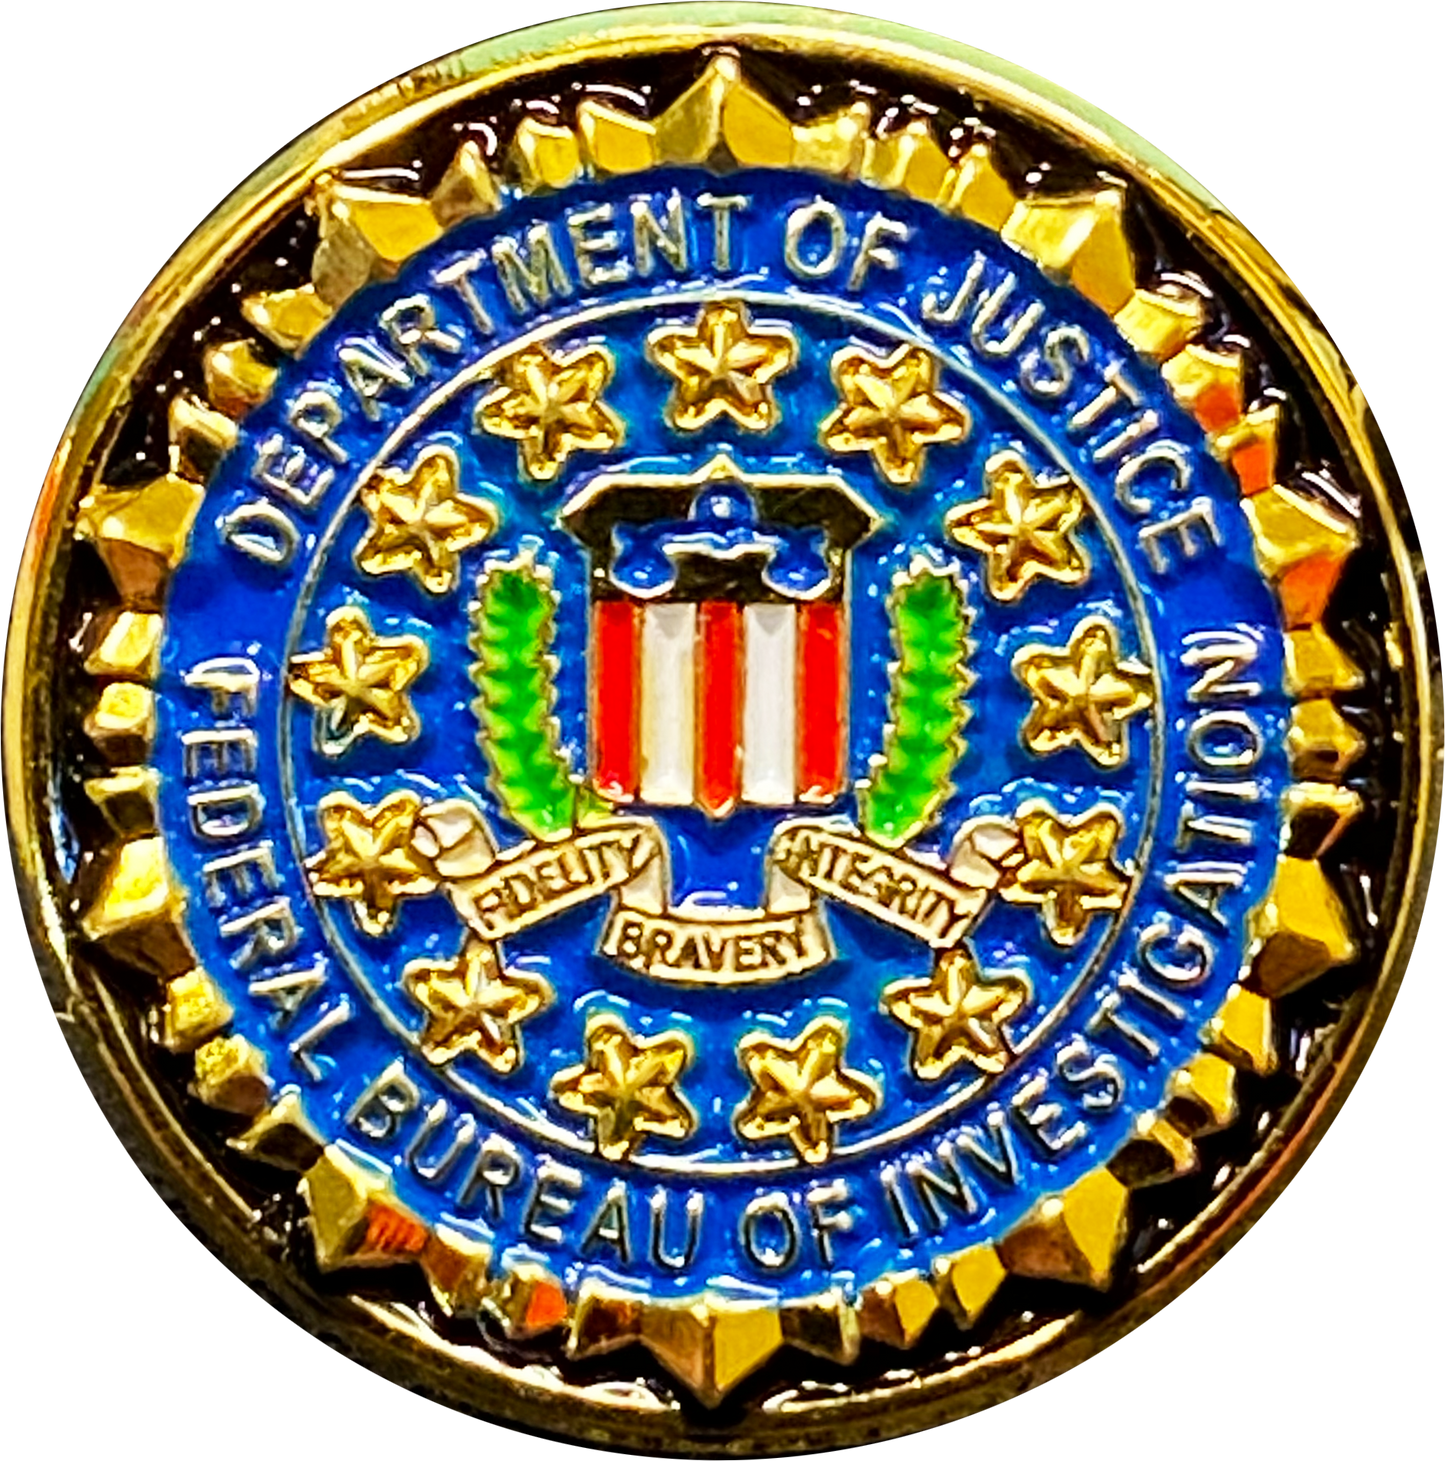 M-29 FBI lapel pin with deluxe locking safety clasp